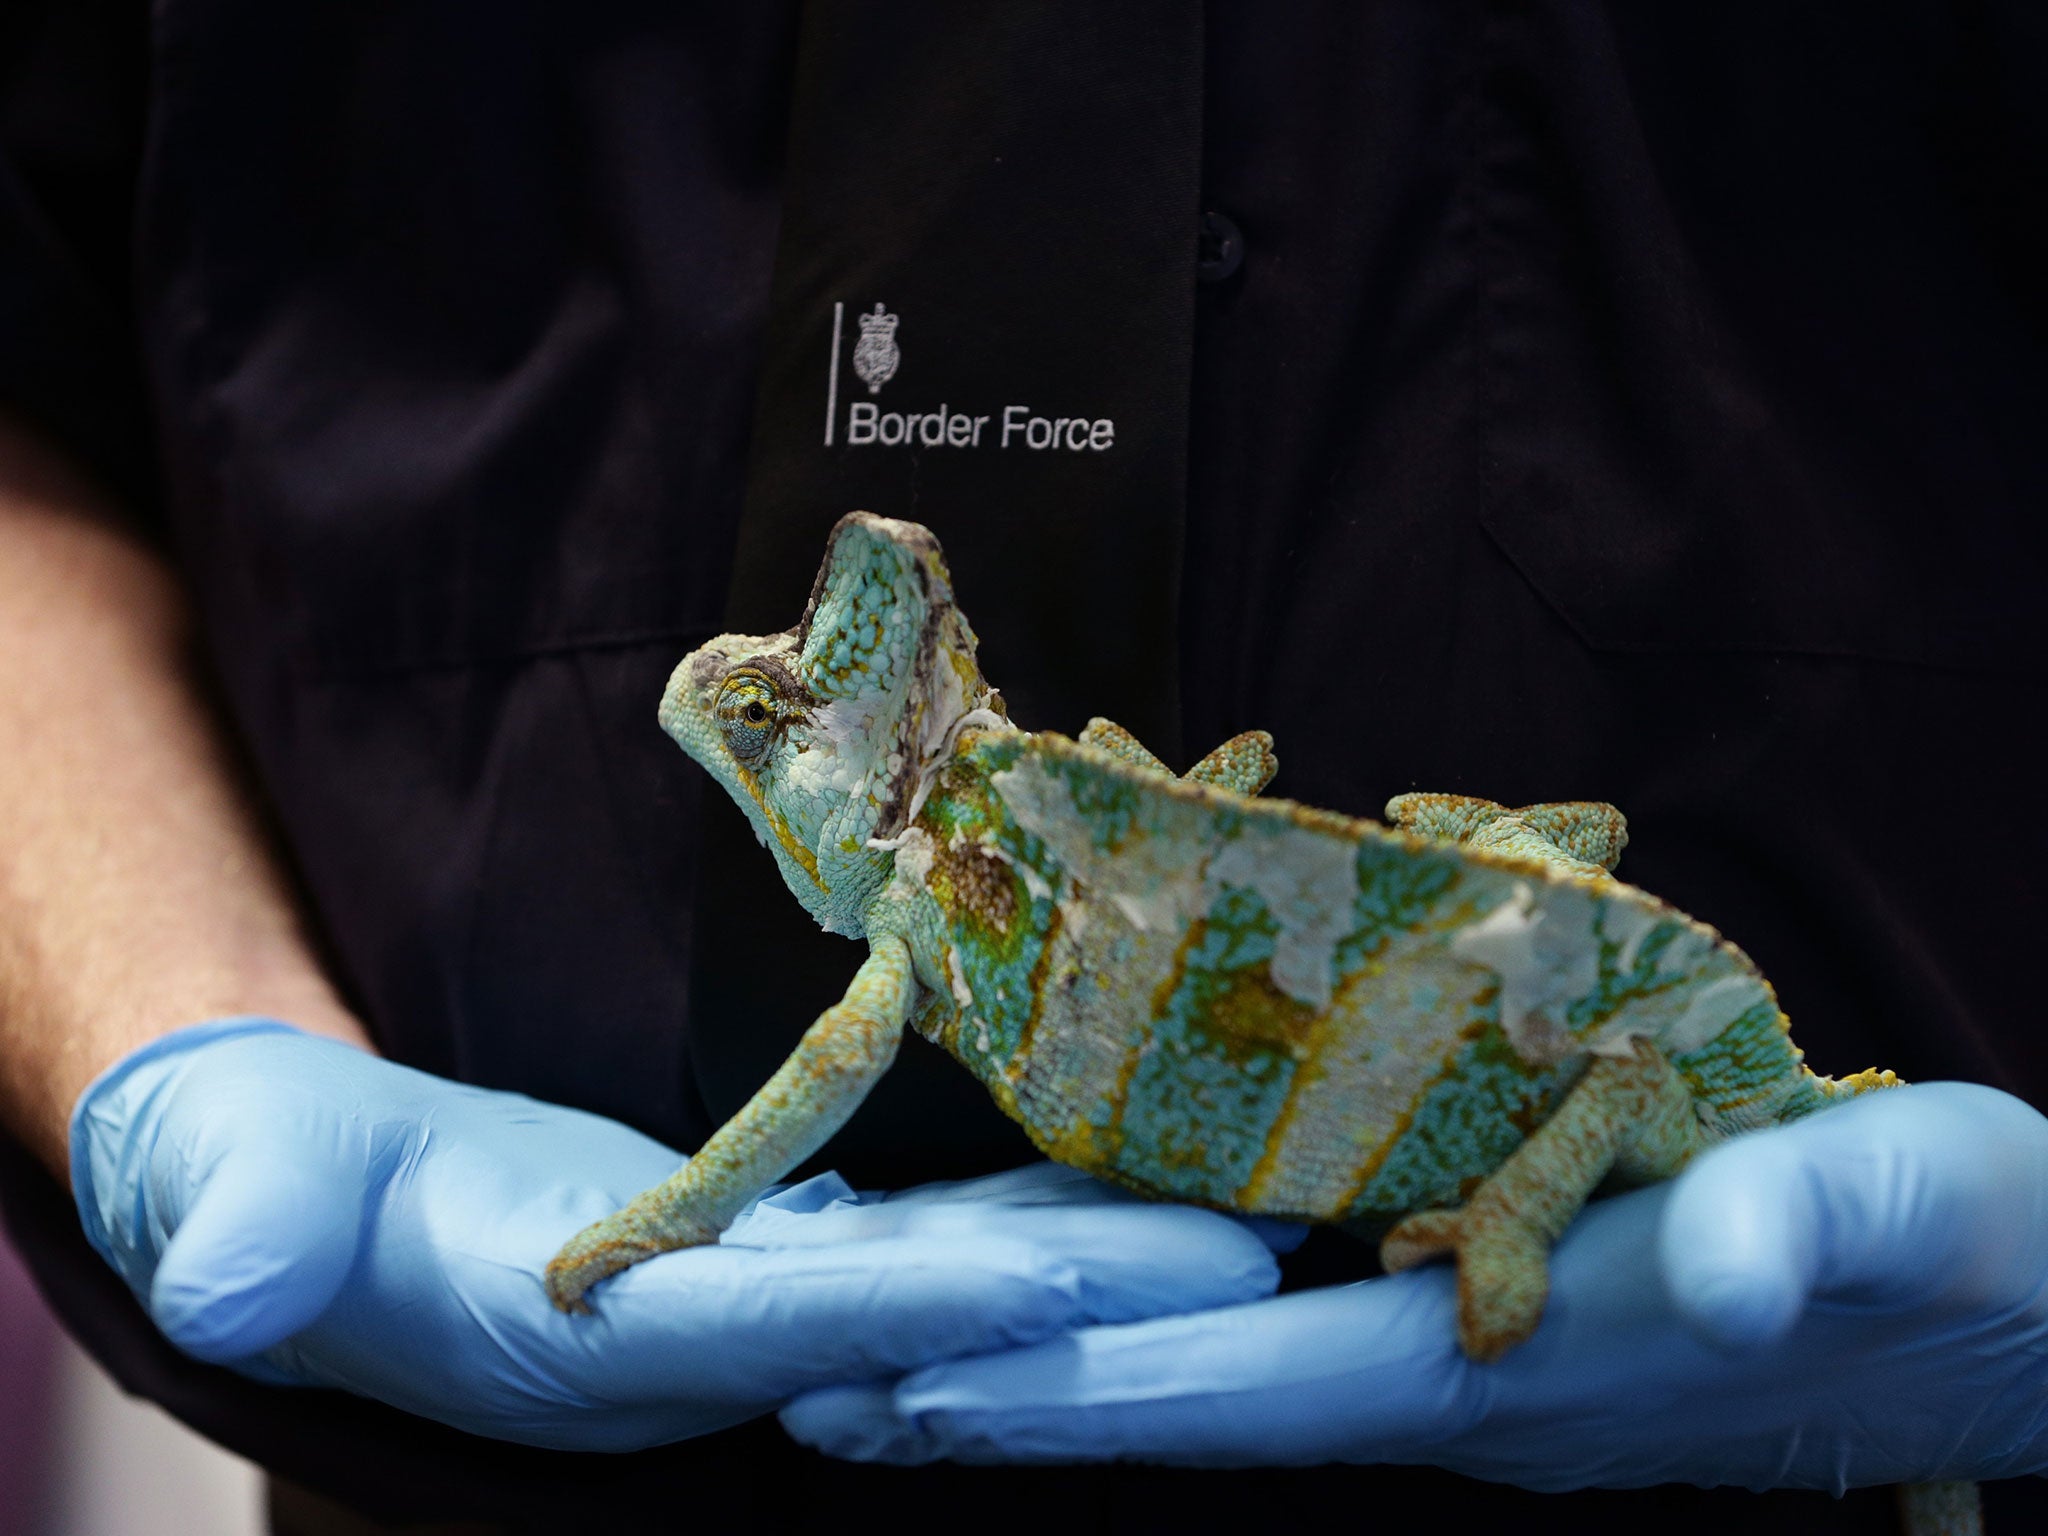 Tim Luffman, a wildlife enforcement officer from Border Force, holding a veiled chameleon which was uncovered during Operation Cobra at Heathrow Airport, London